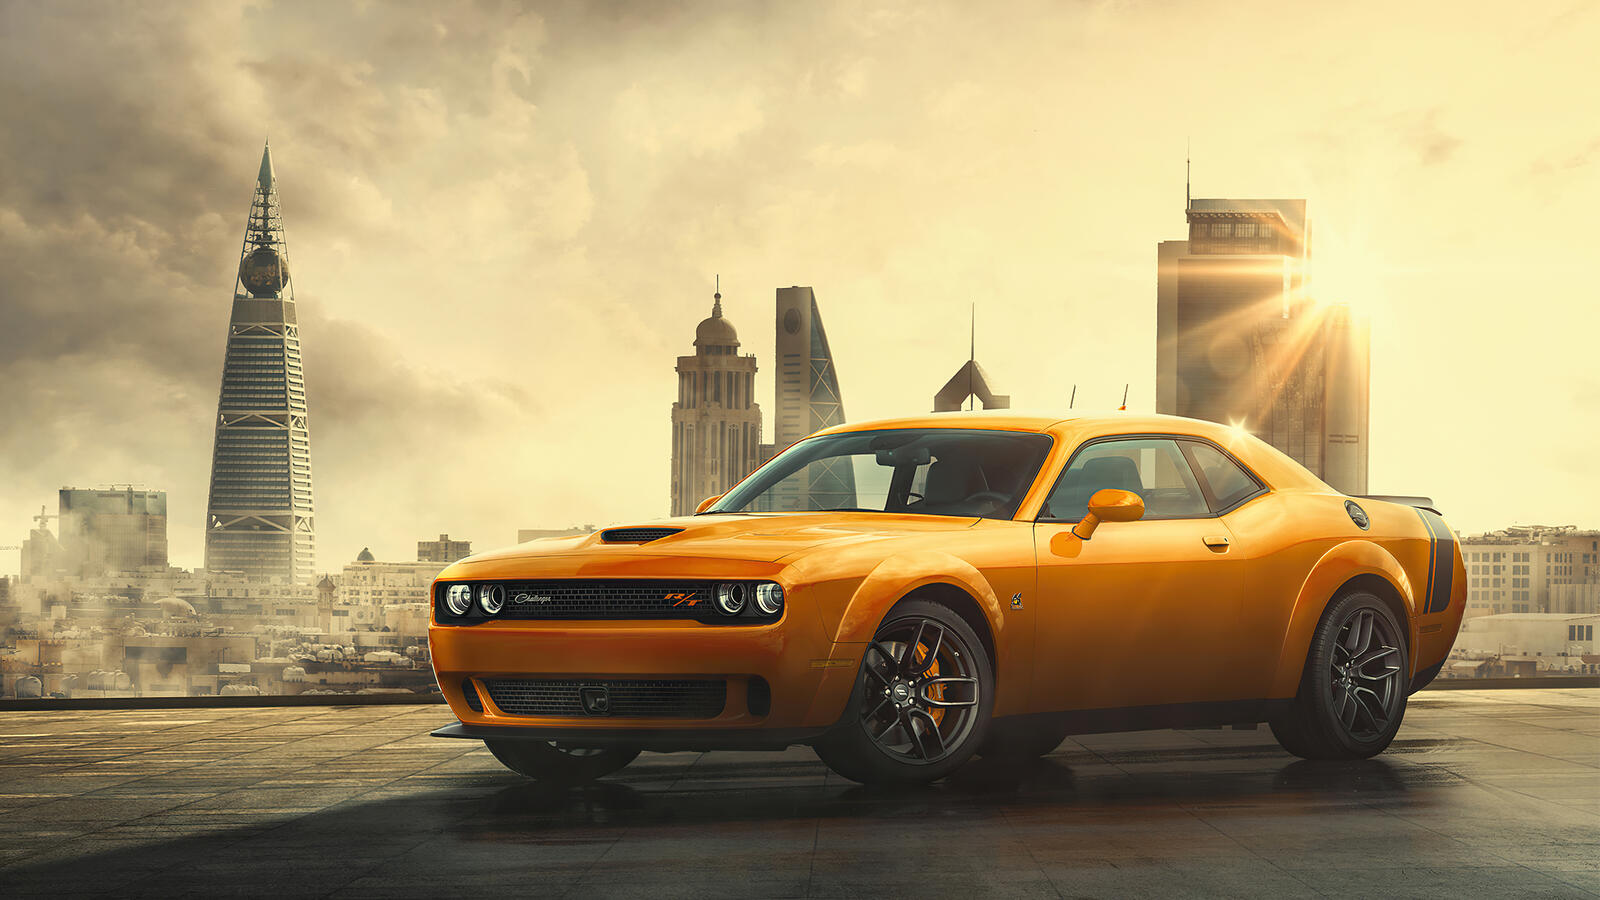 Free photo Dodge Challenger with the city as a backdrop